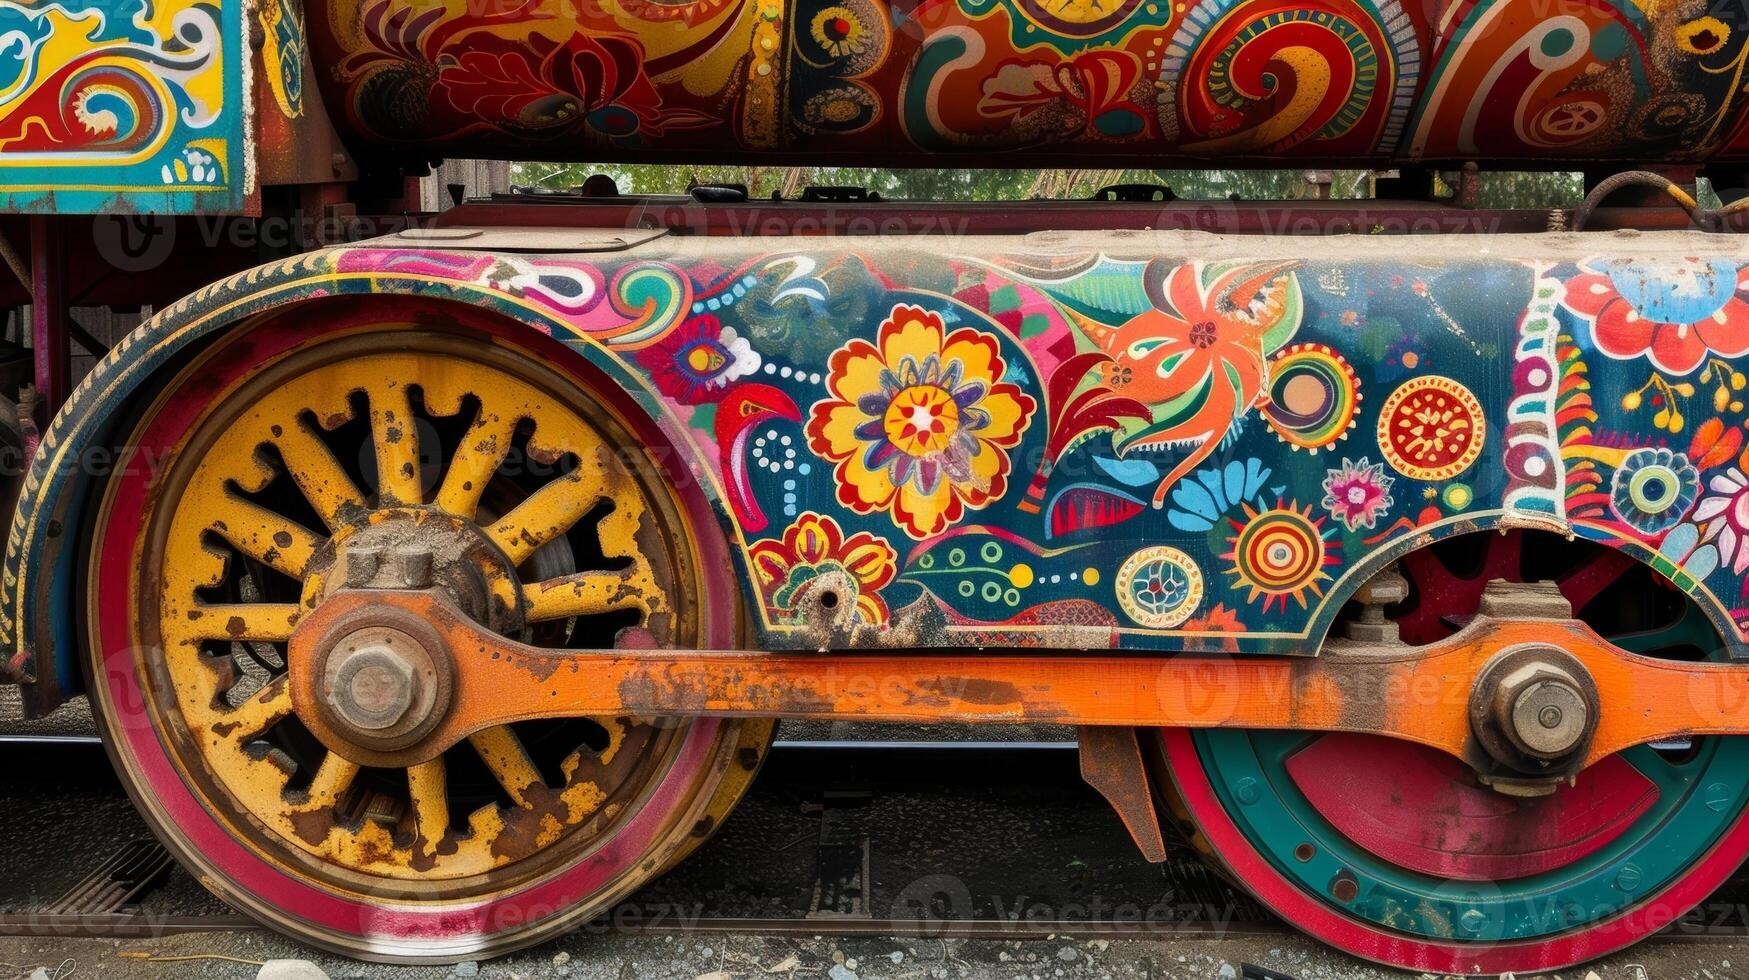 A brightlycolored steam roller adorned with retro decals draws the attention of passersby with its unusual design and intricate patterns photo